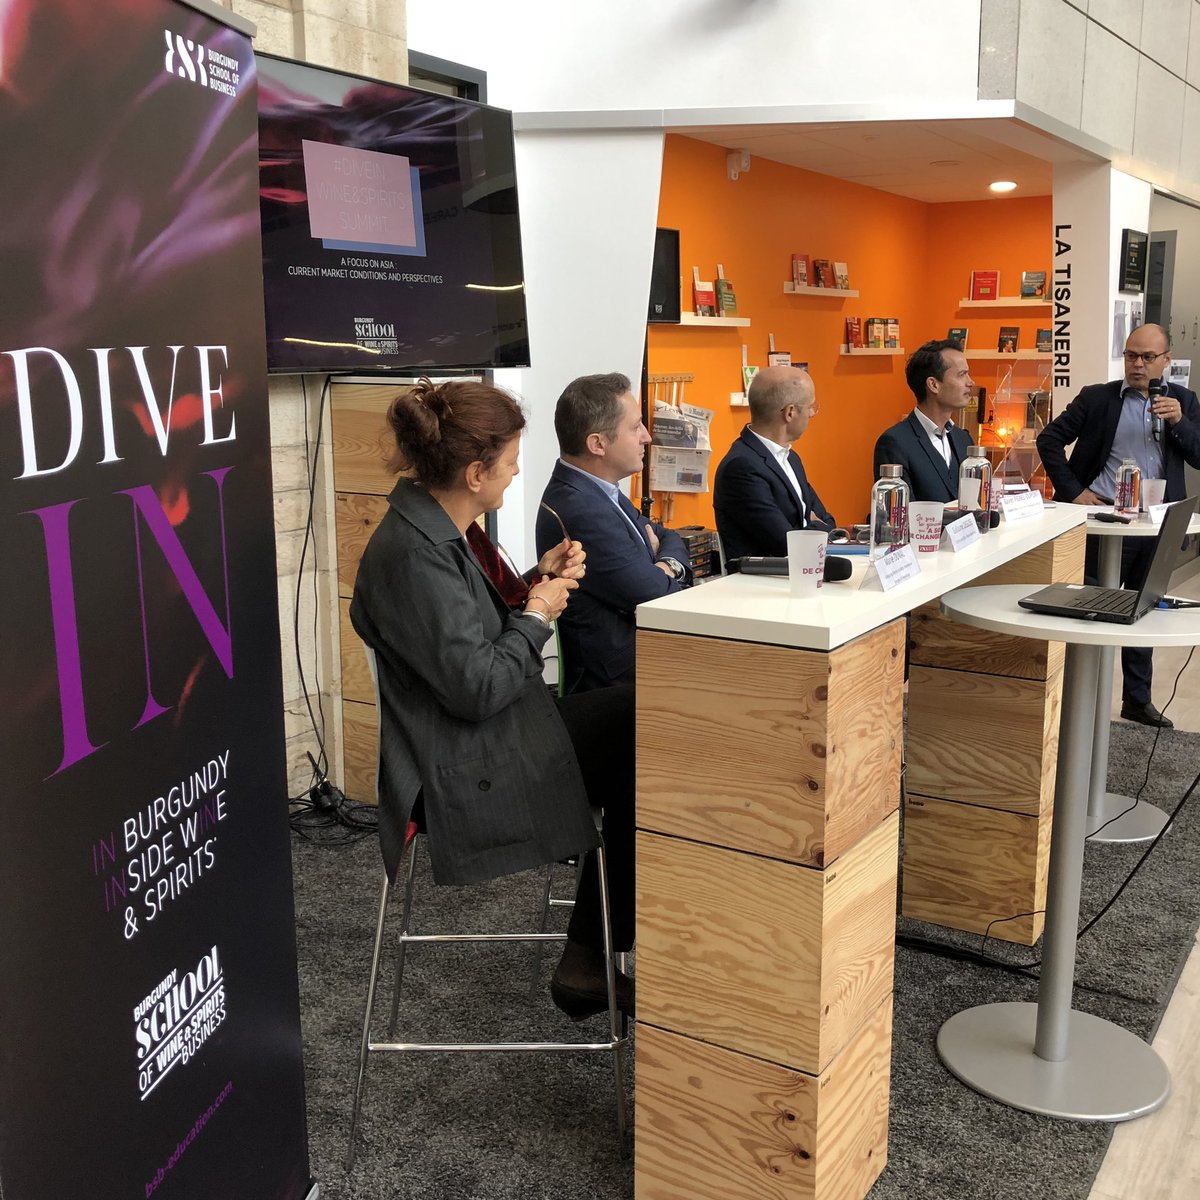 Welcome to the Wine&Spirits Summit! A great thank you to our speakers Marie Duval, Guillaume Déglise and Xavier Pignel-Dupont 😊#winebusiness #winemanagement #winelovers #divein #wearebsb #wearegamechangers